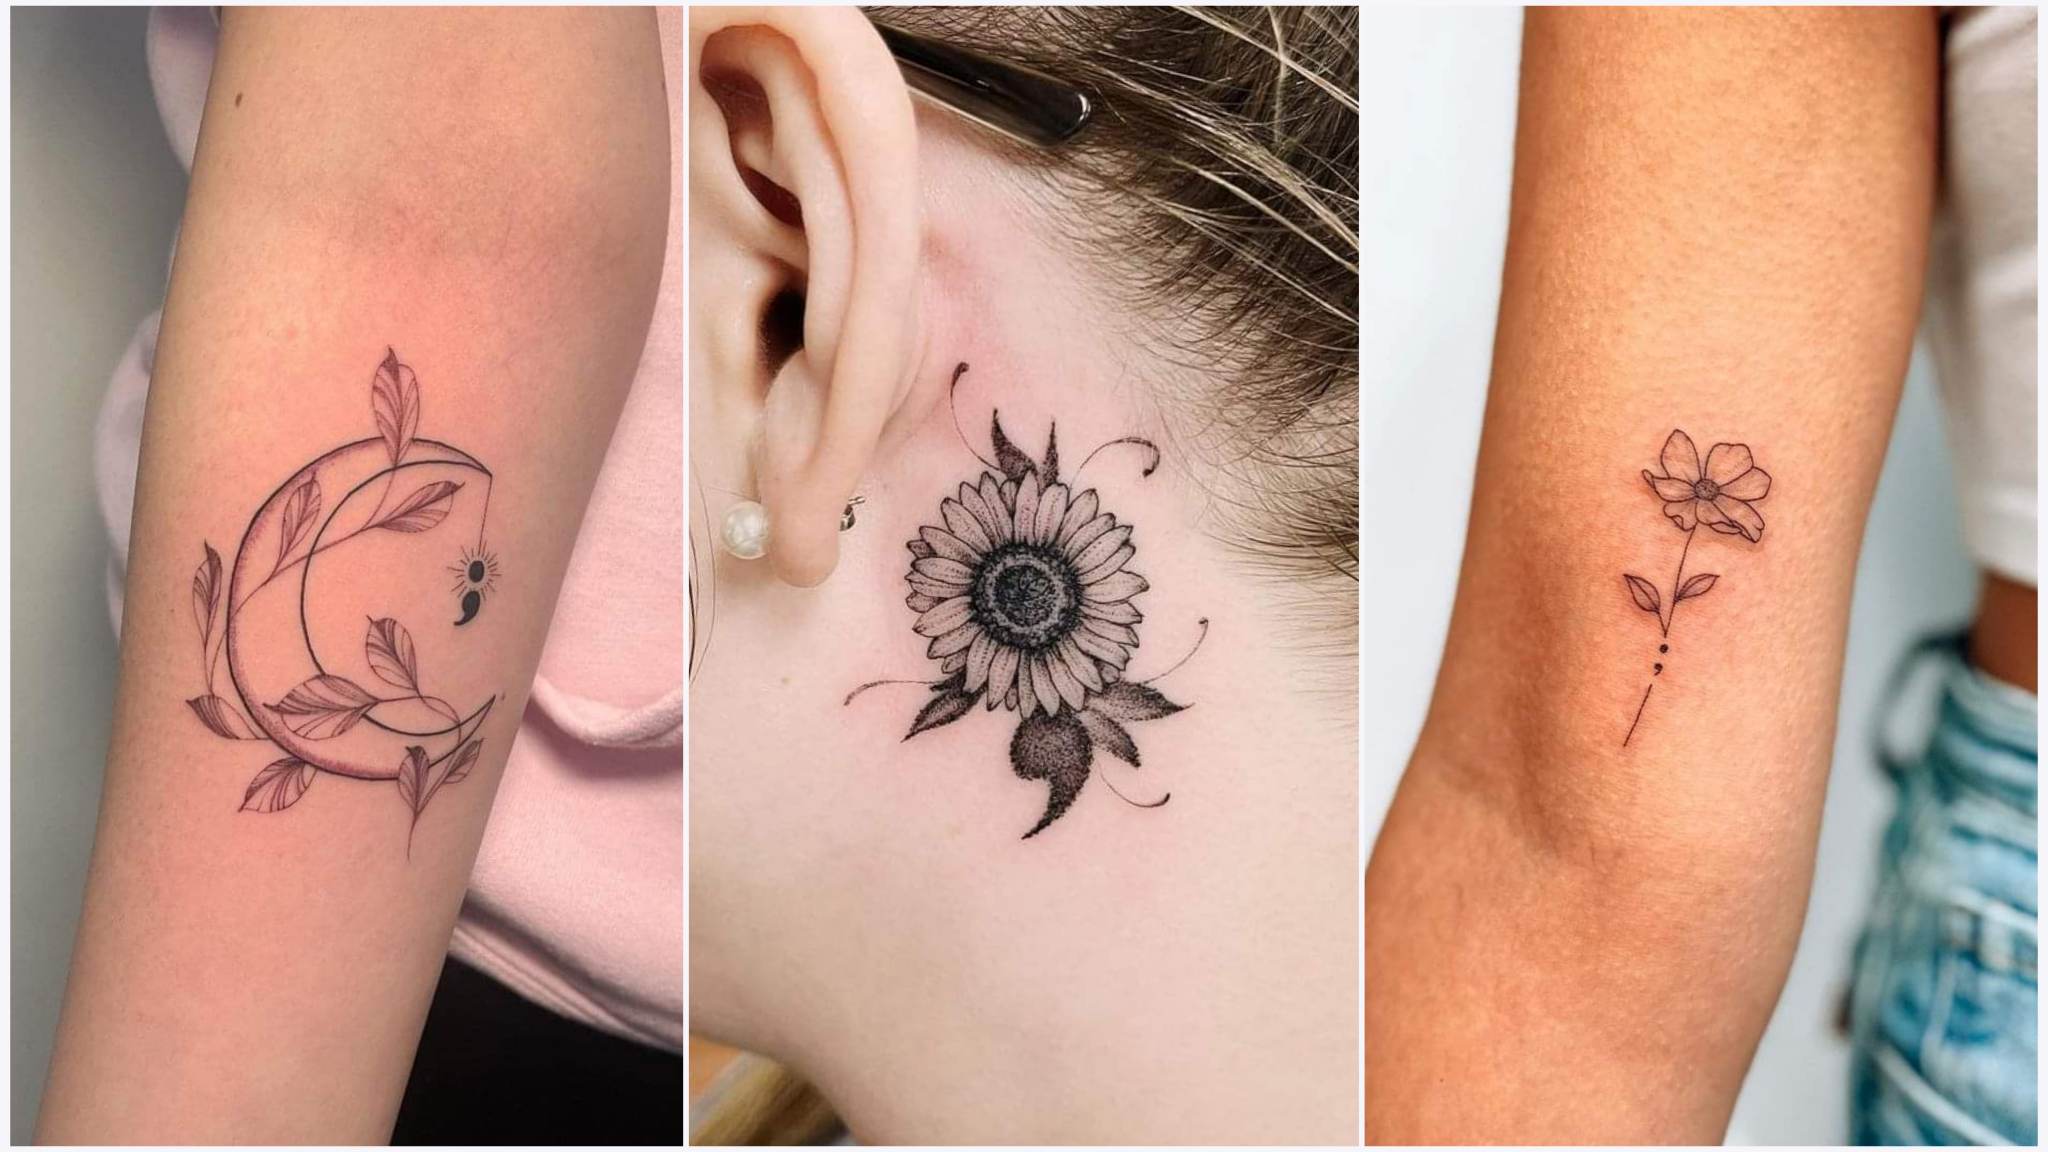 Yoga tattoos: Ink to Add Focus to your Practice